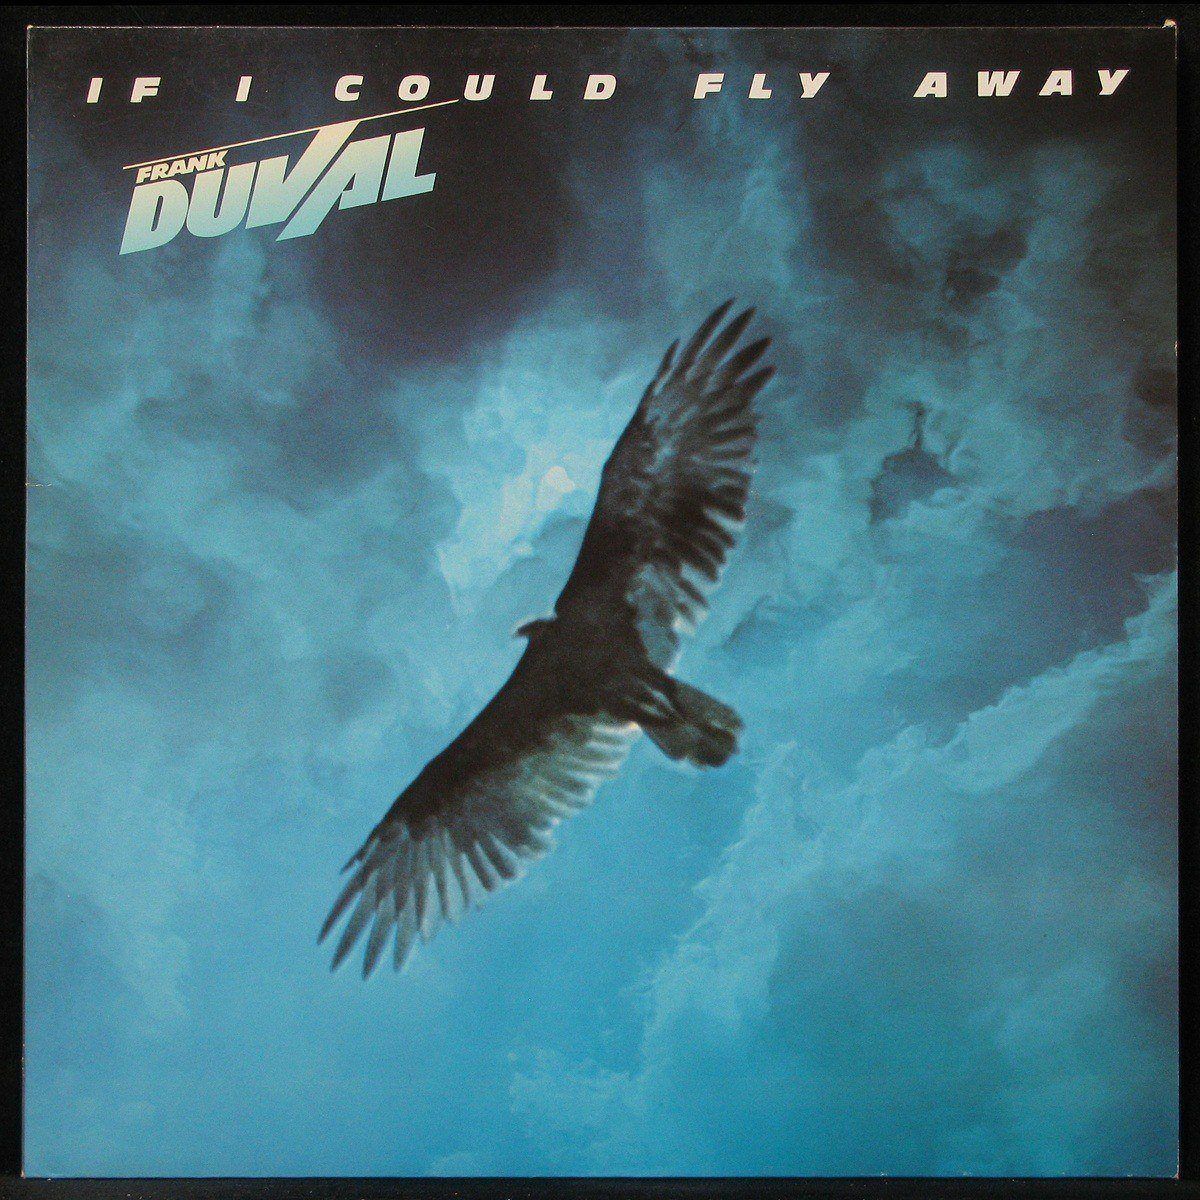 Frank Duval - If I Could Fly Away (1983)